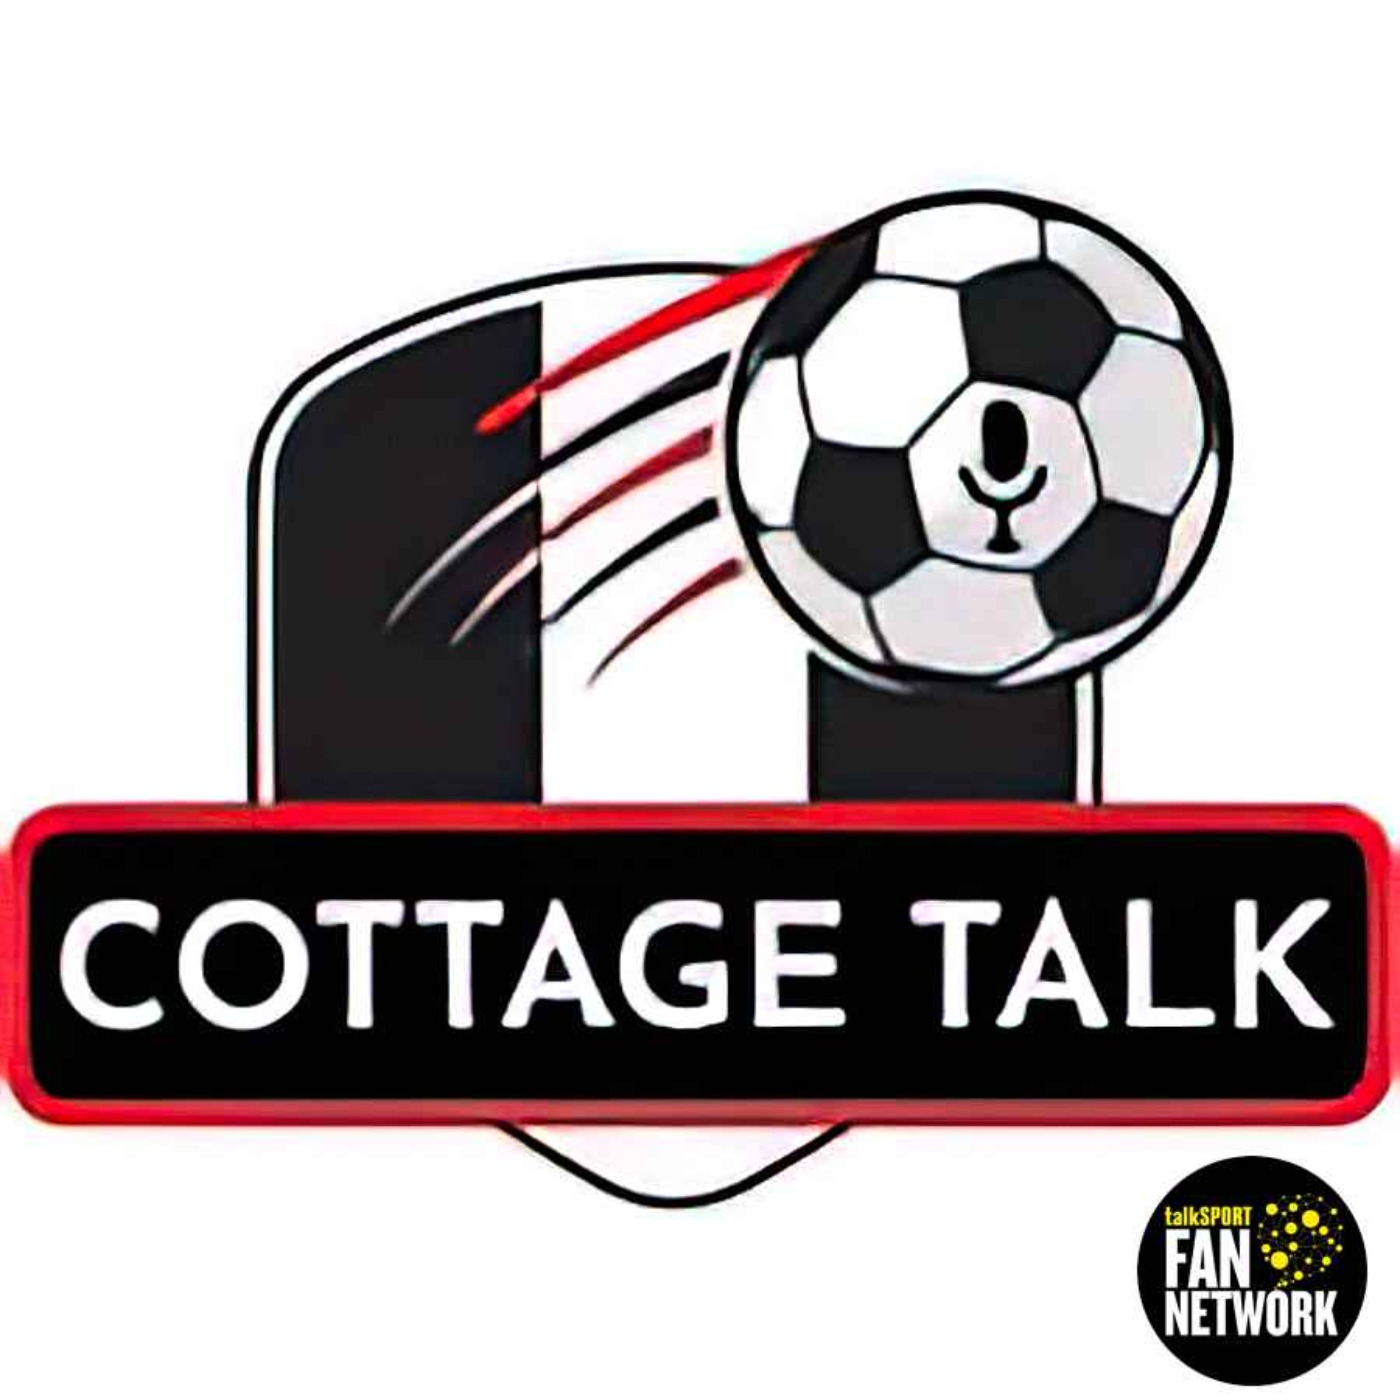 Cottage Talk Preview: Manchester United vs. Fulham Football Club